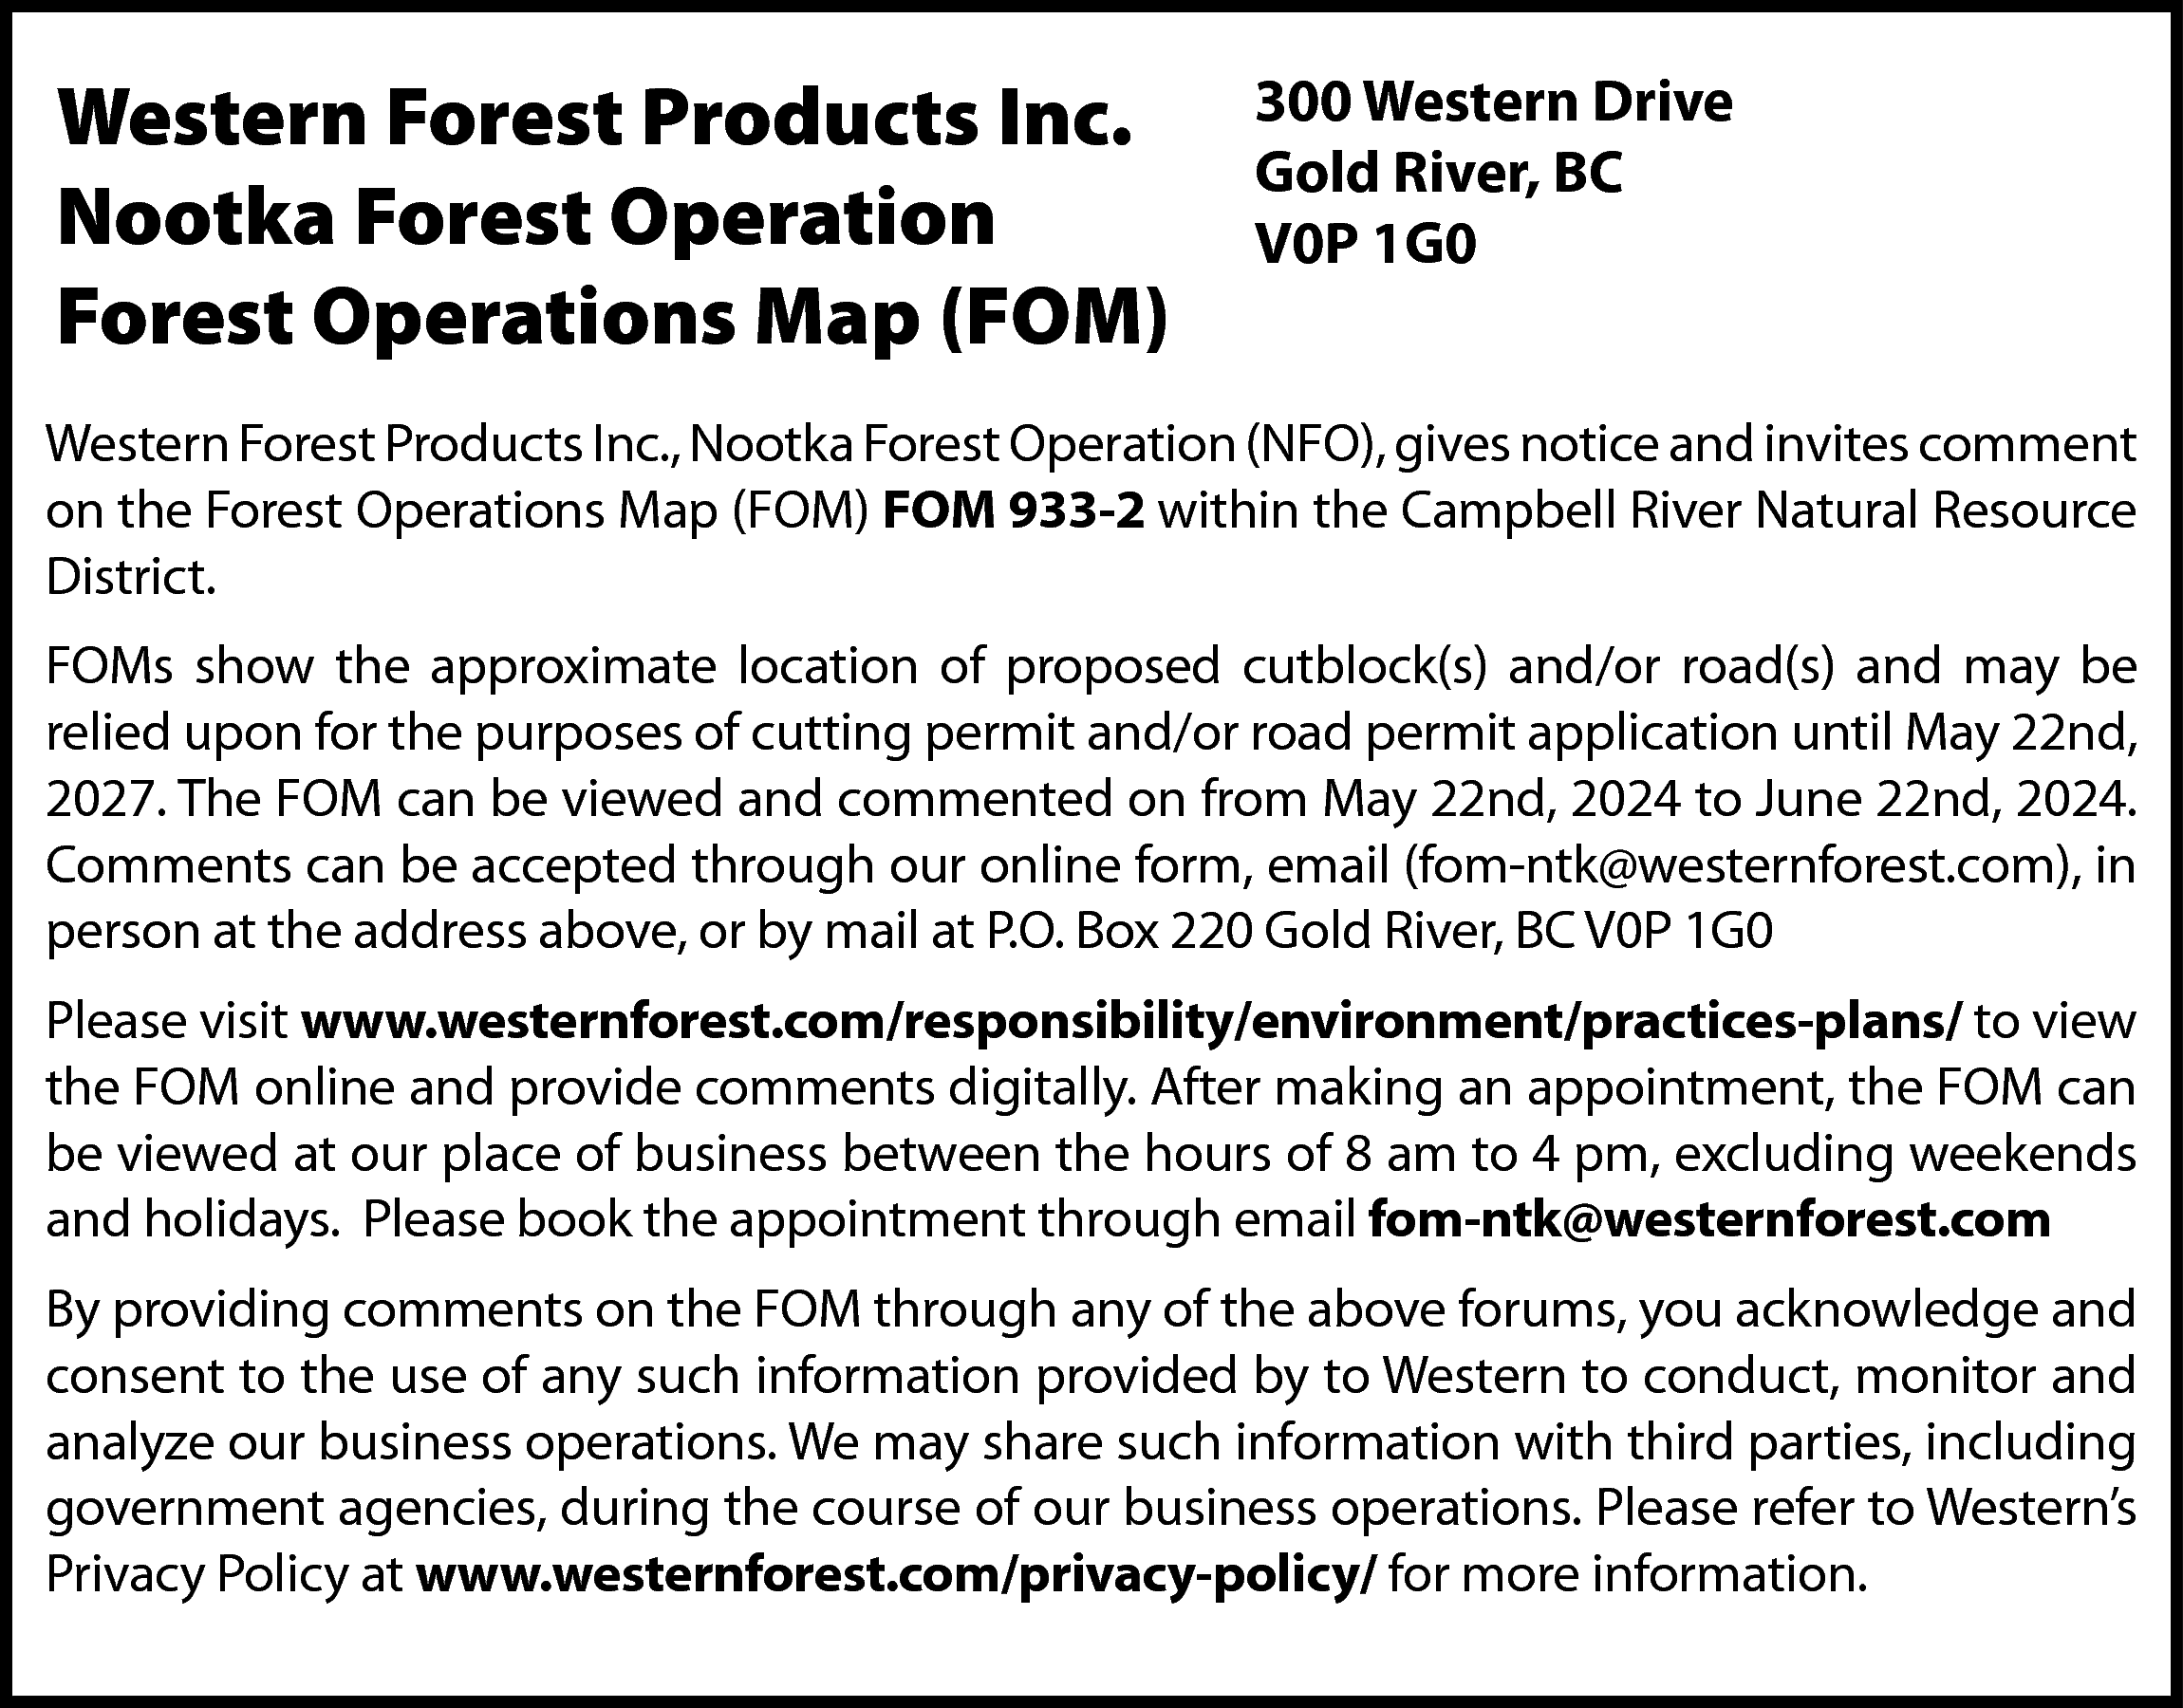 Western Forest Products Inc. <br>Nootka  Western Forest Products Inc.  Nootka Forest Operation  Forest Operations Map (FOM)    300 Western Drive  Gold River, BC  V0P 1G0    Western Forest Products Inc., Nootka Forest Operation (NFO), gives notice and invites comment  on the Forest Operations Map (FOM) FOM 933-2 within the Campbell River Natural Resource  District.  FOMs show the approximate location of proposed cutblock(s) and/or road(s) and may be  relied upon for the purposes of cutting permit and/or road permit application until May 22nd,  2027. The FOM can be viewed and commented on from May 22nd, 2024 to June 22nd, 2024.  Comments can be accepted through our online form, email (fom-ntk@westernforest.com), in  person at the address above, or by mail at P.O. Box 220 Gold River, BC V0P 1G0  Please visit www.westernforest.com/responsibility/environment/practices-plans/ to view  the FOM online and provide comments digitally. After making an appointment, the FOM can  be viewed at our place of business between the hours of 8 am to 4 pm, excluding weekends  and holidays. Please book the appointment through email fom-ntk@westernforest.com  By providing comments on the FOM through any of the above forums, you acknowledge and  consent to the use of any such information provided by to Western to conduct, monitor and  analyze our business operations. We may share such information with third parties, including  government agencies, during the course of our business operations. Please refer to Western’s  Privacy Policy at www.westernforest.com/privacy-policy/ for more information.    